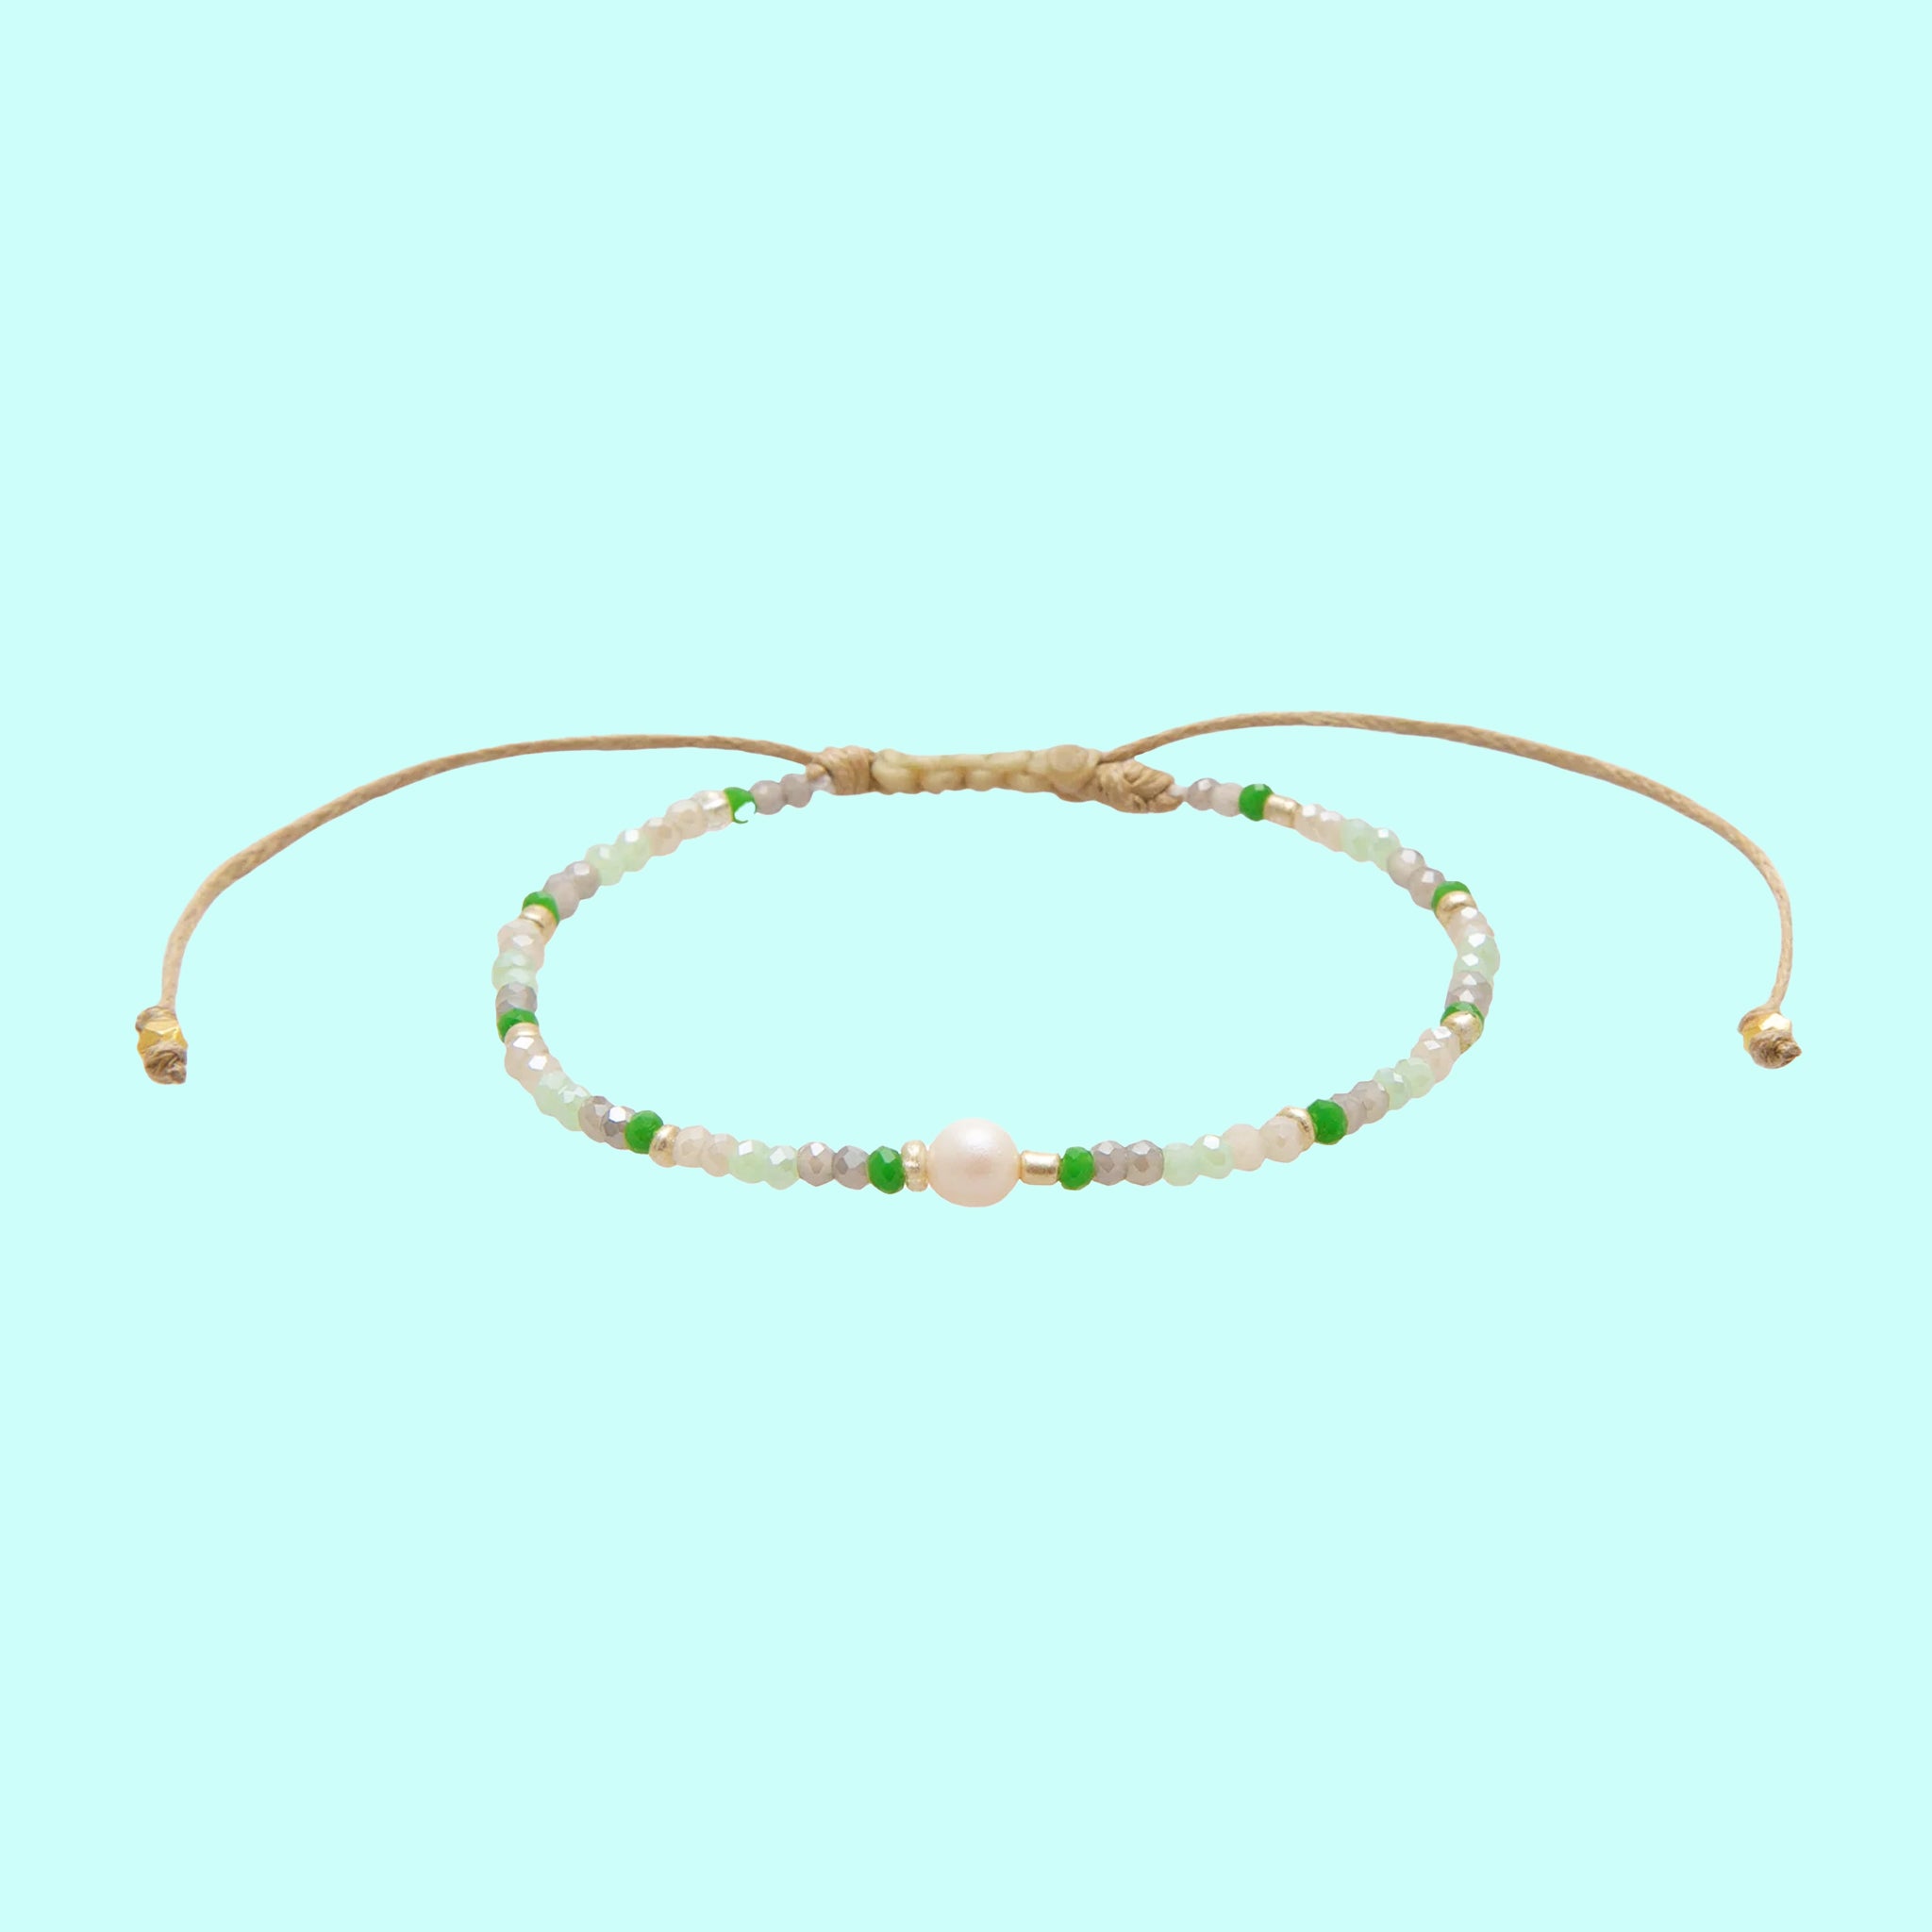 A beaded turquoise, white and green bracelet with an adjustable string. 